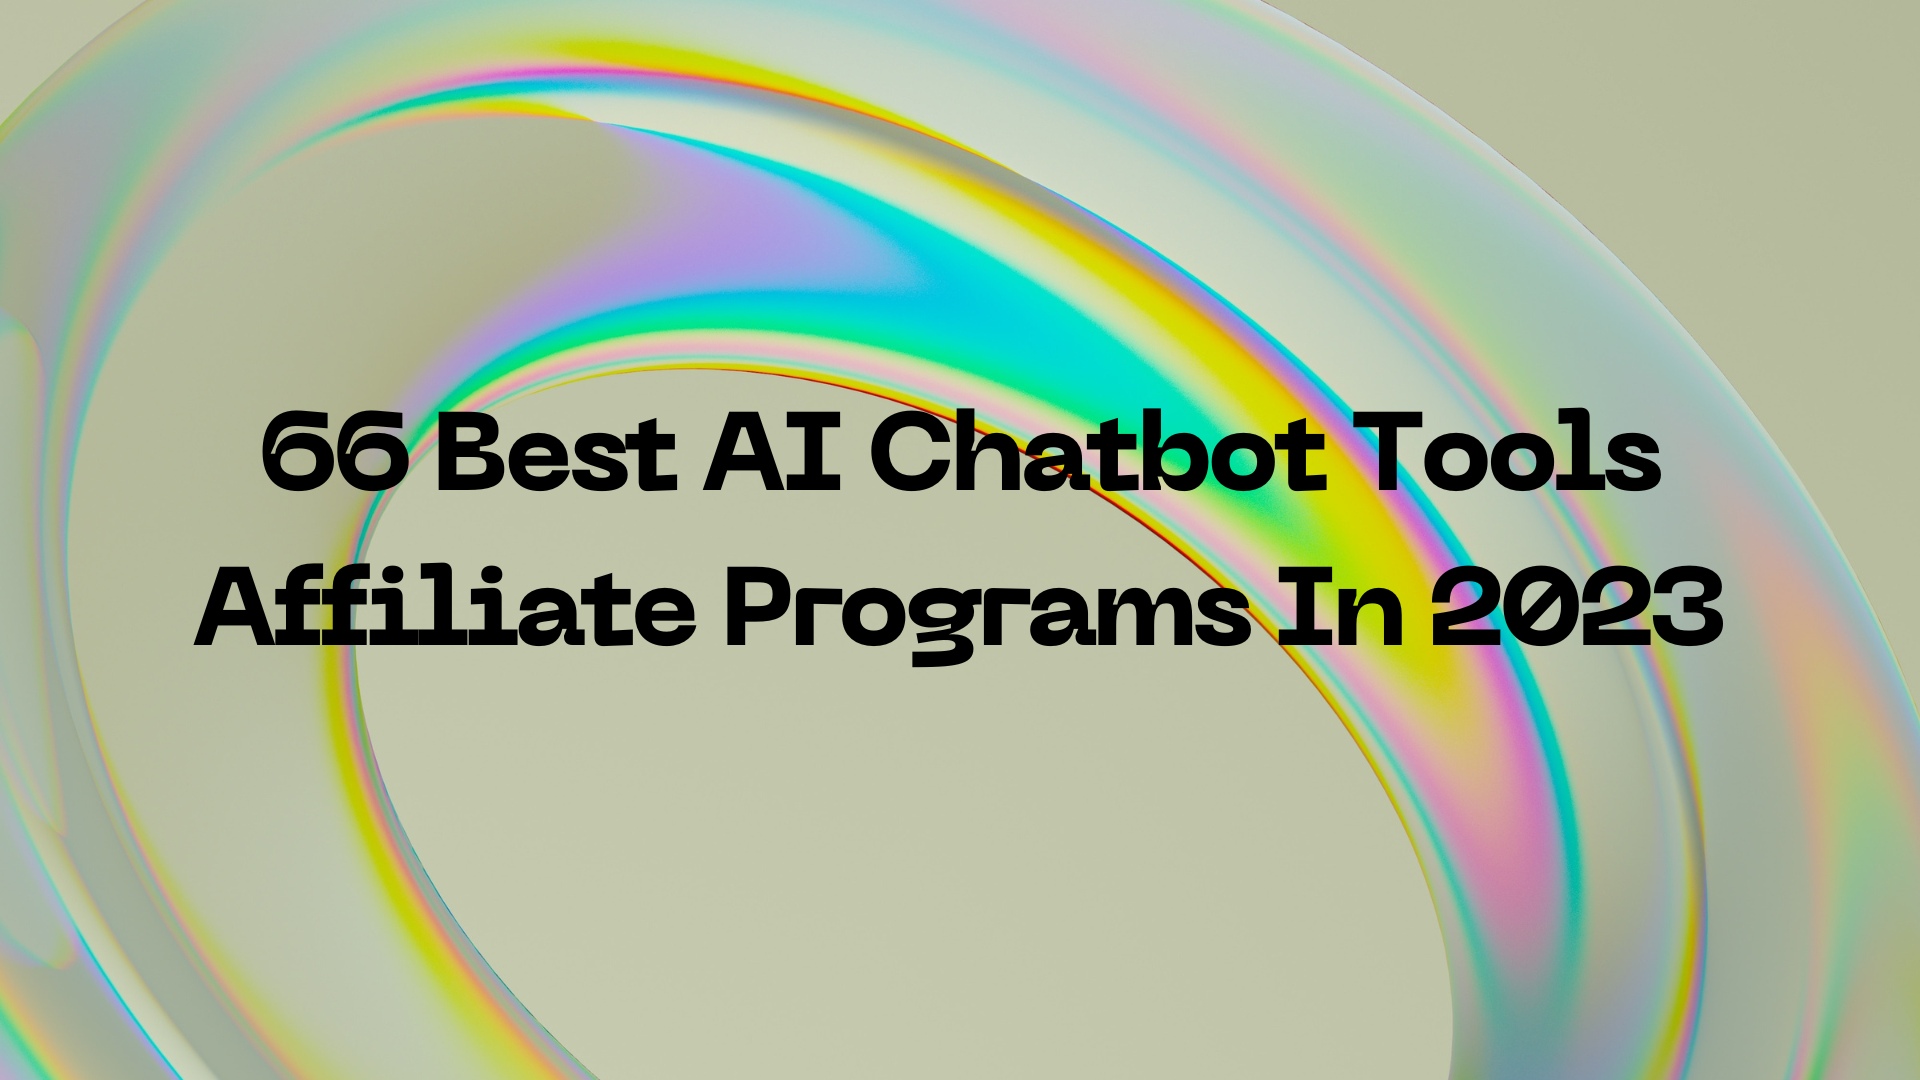 66 Best AI Chatbot Tools Affiliate Programs In 2023